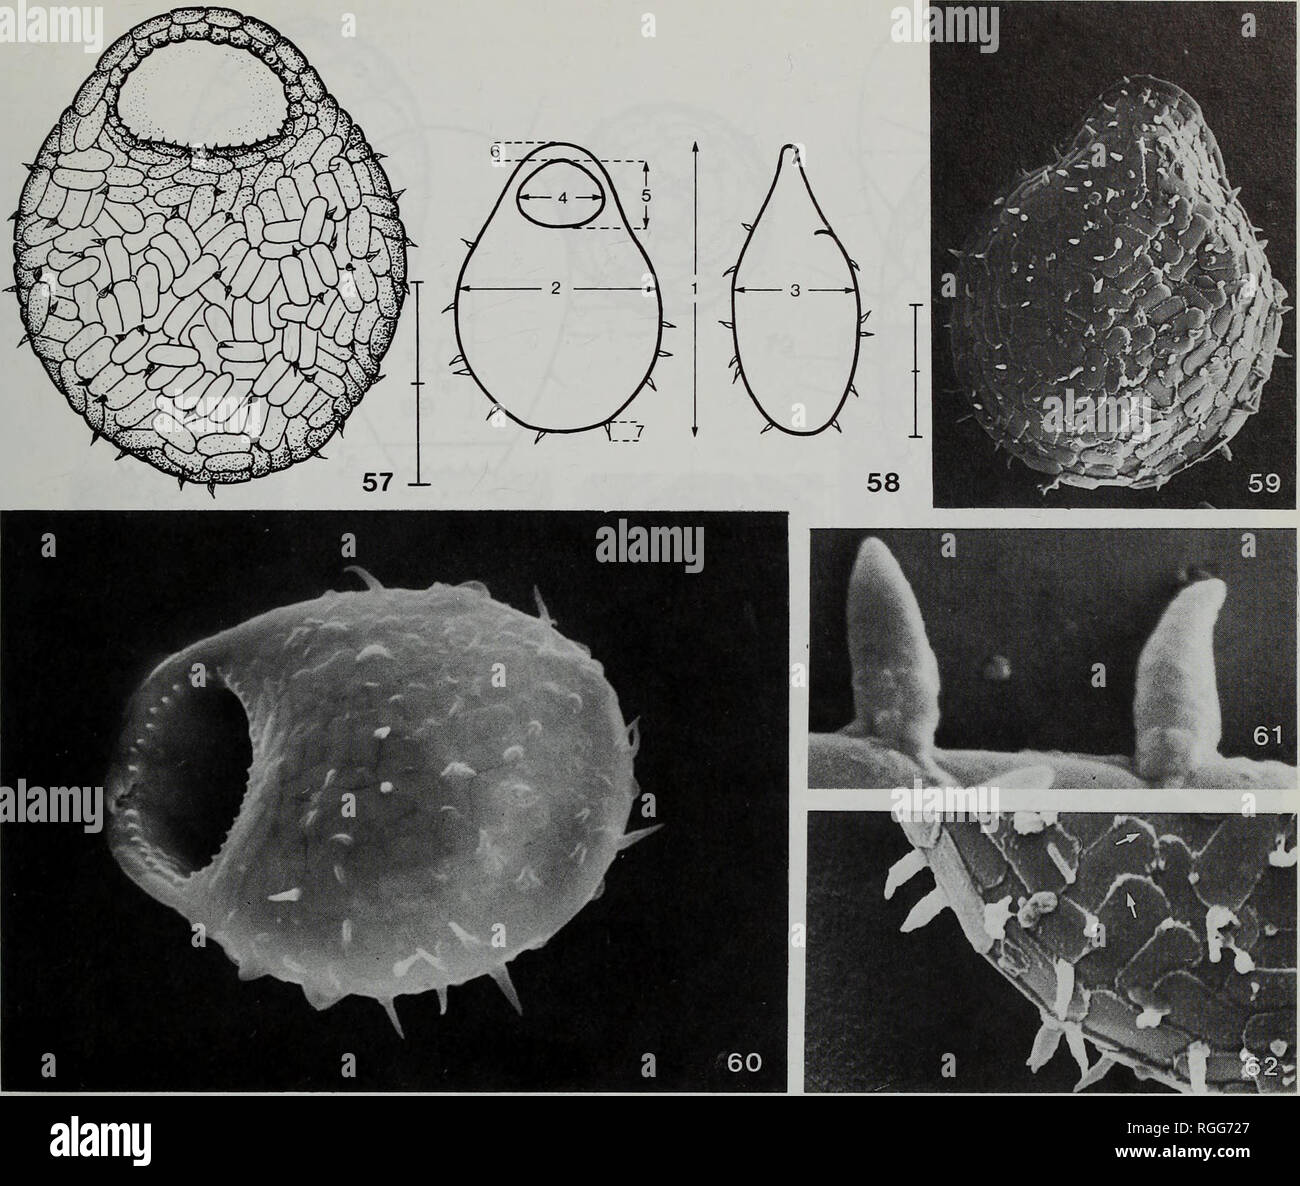 . Bulletin of the British Museum (Natural History) Zoology. TWELVE SOIL TESTATE AMOEBAE FROM AUSTRALIA, AFRICA, AND AUSTRIA 11. Figs 57-62 Corythion asperulum, light microscopic (Fig. 57) and SEM-aspects (Figs 59-62) and ideal individual (Fig. 58). 57 Ventral view. 58 Ventral and lateral view. 59,60 Dorsal and ventral view, x 1200, x 1700. 61 Spines, x 12300. 62 Detail of surface, x 3200. Note organic cement surrounding platelets (arrows). Scale bar divisions 10 urn. Shell measurements show rather high variability; only parameter (1) has a CV less than 10% (Table 10). The biometric data of Sch Stock Photo